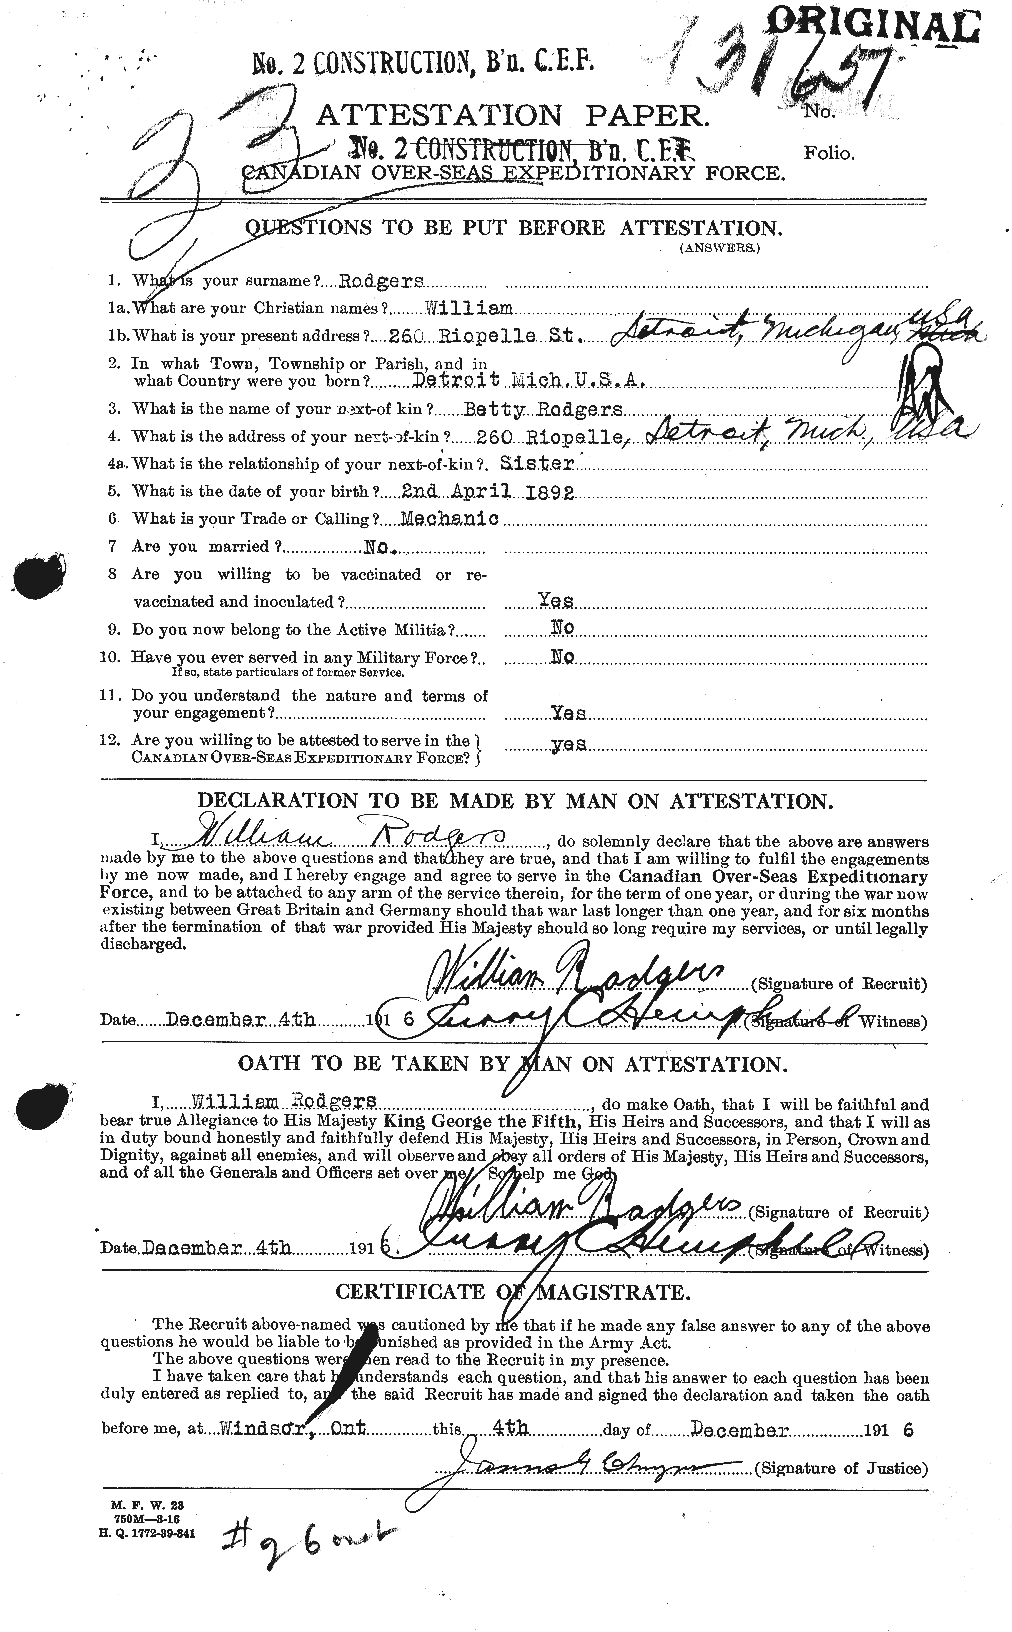 Personnel Records of the First World War - CEF 608394a